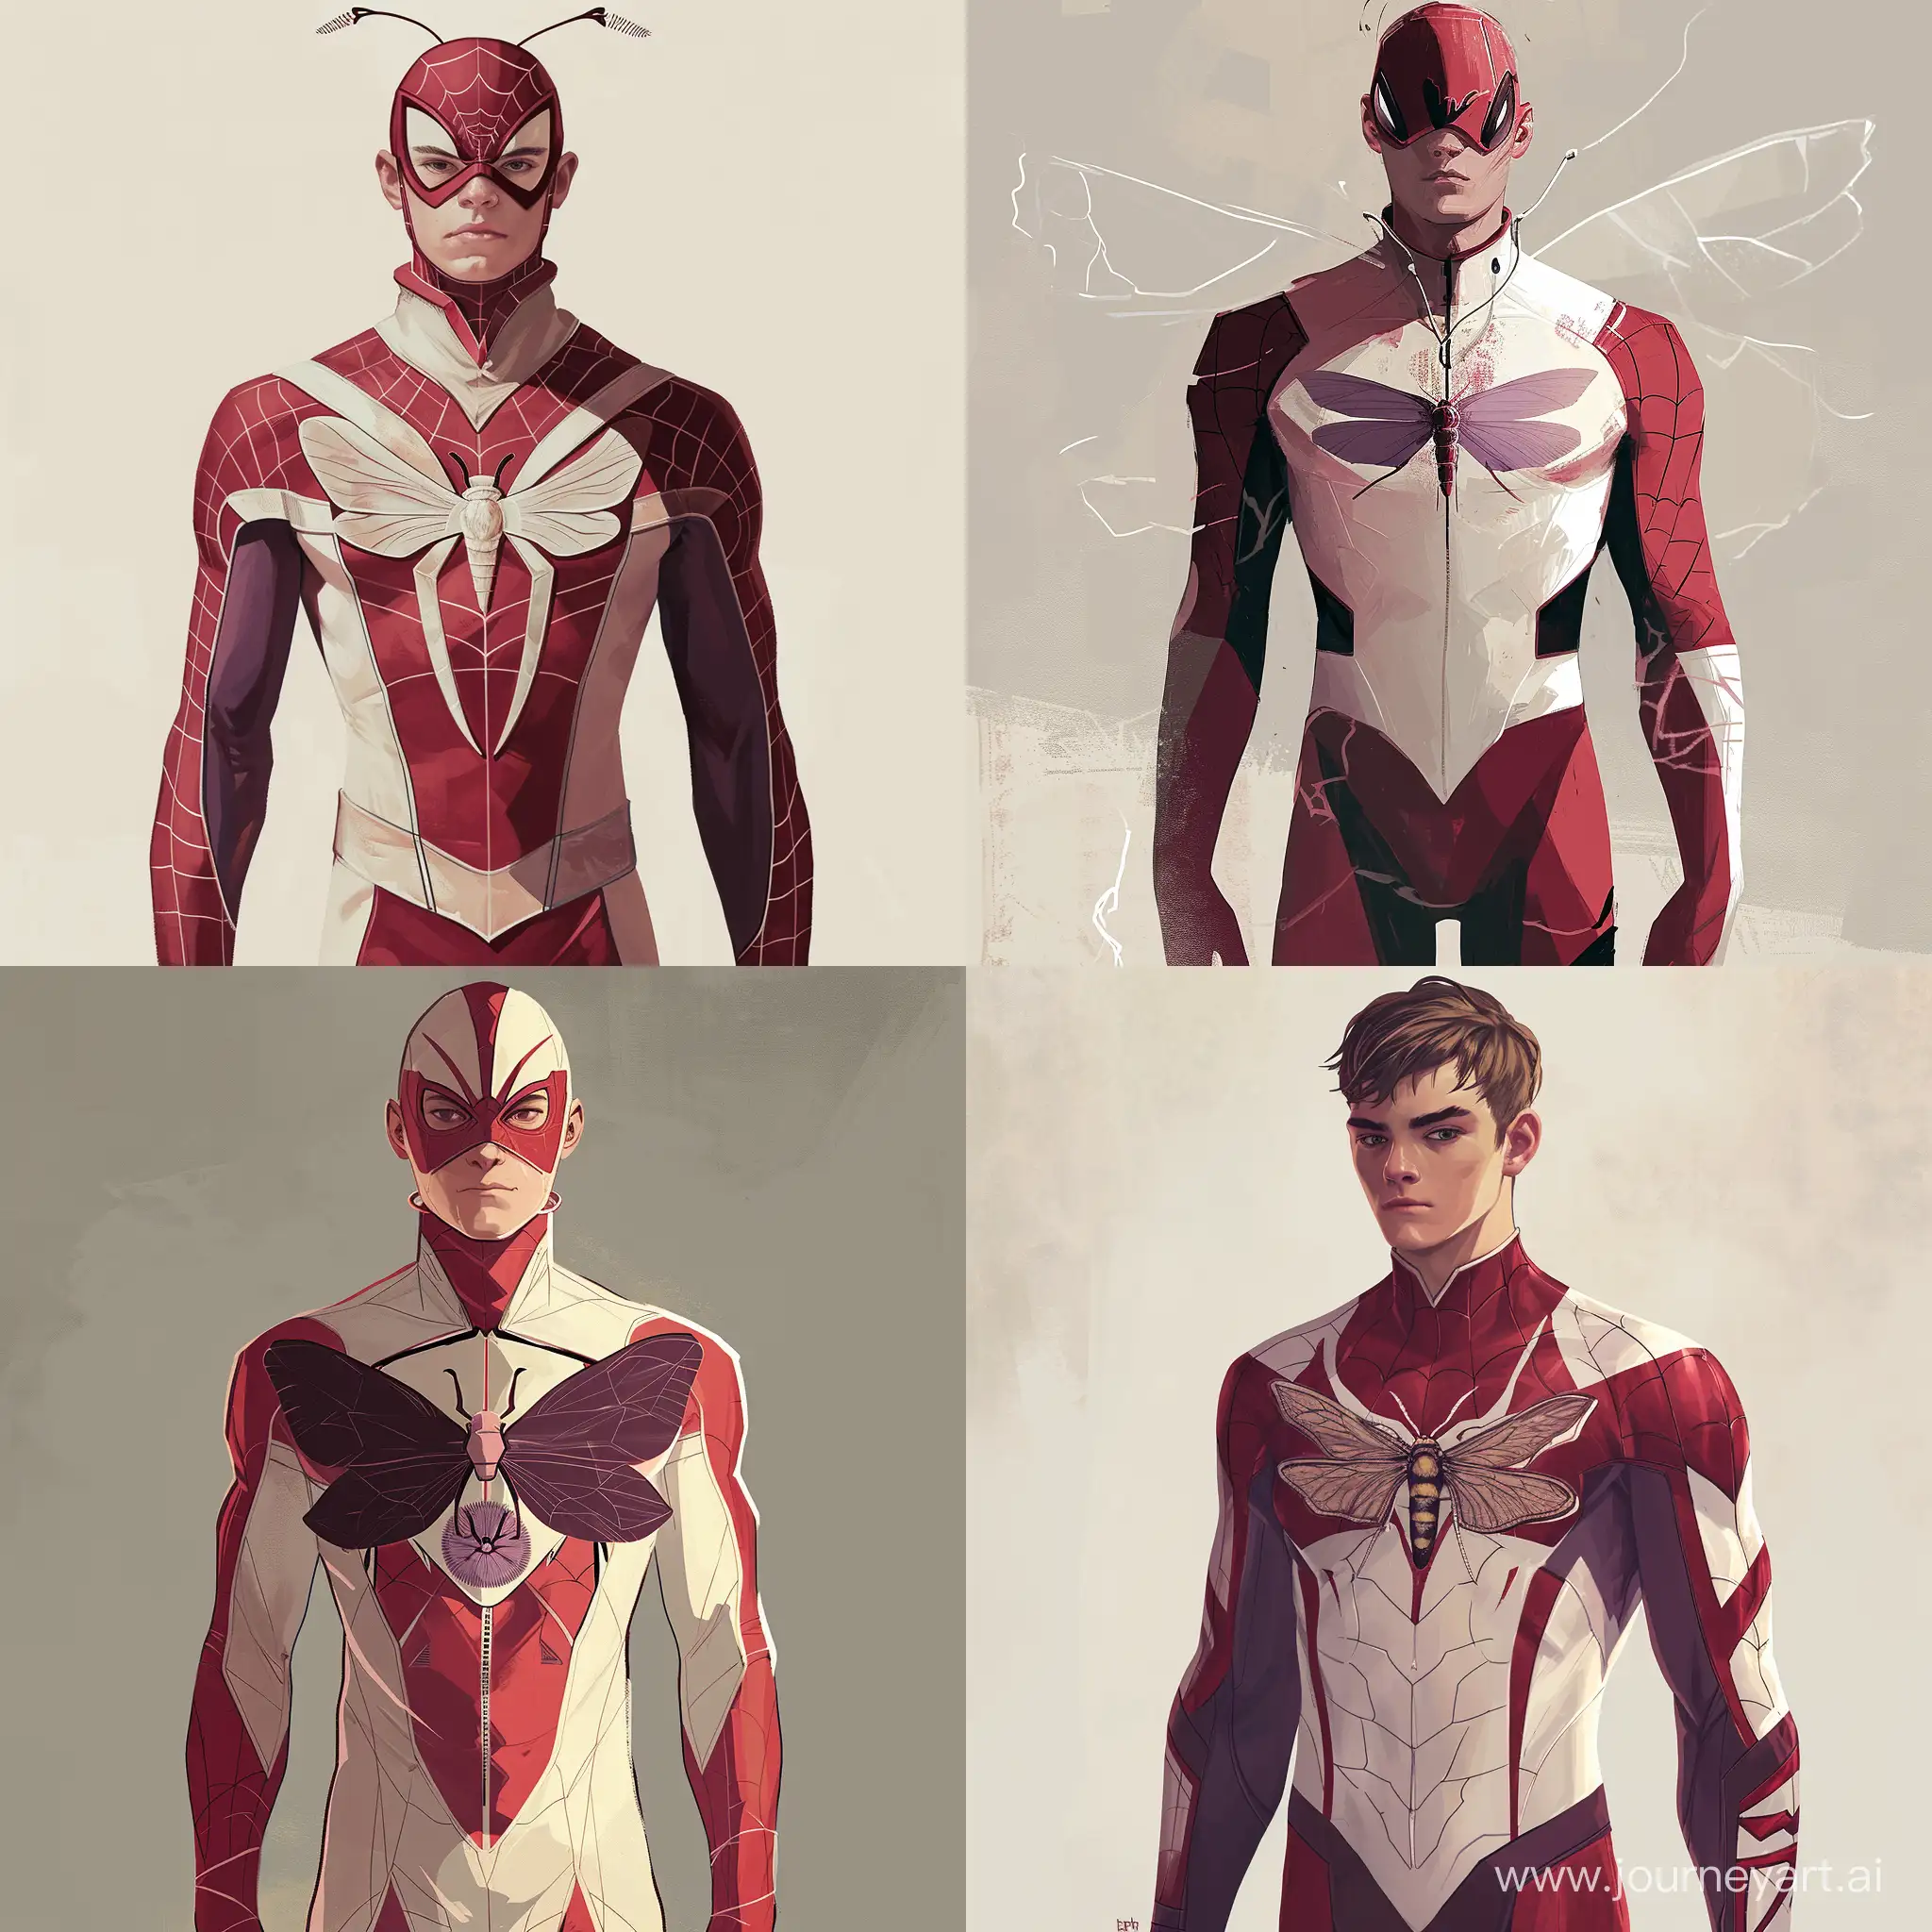 Generate an illustration of Moth-Man, an 18-year-old superhero inspired by Spider-Man. Design a slim and sleek costume that combines shades of red and white, with subtle dark lavender accents for a modern touch. Incorporate a stylized moth symbol prominently displayed on the chest, representing hope, transformation, and Karter Knight's journey as a hero. The emblem should be distinctive and carry symbolic significance. Capture the youthful energy of Moth-Man while emphasizing the sleekness of the costume. Pay attention to the details in the design, ensuring a modern and stylish appearance. Illustrate Karter Knight in a dynamic pose, showcasing his agility and the iconic elements of his costume. Highlight the character's unique personality and the symbolism behind the moth emblem, creating an image that conveys both the spirit of a young hero and the depth of Karter's journey.